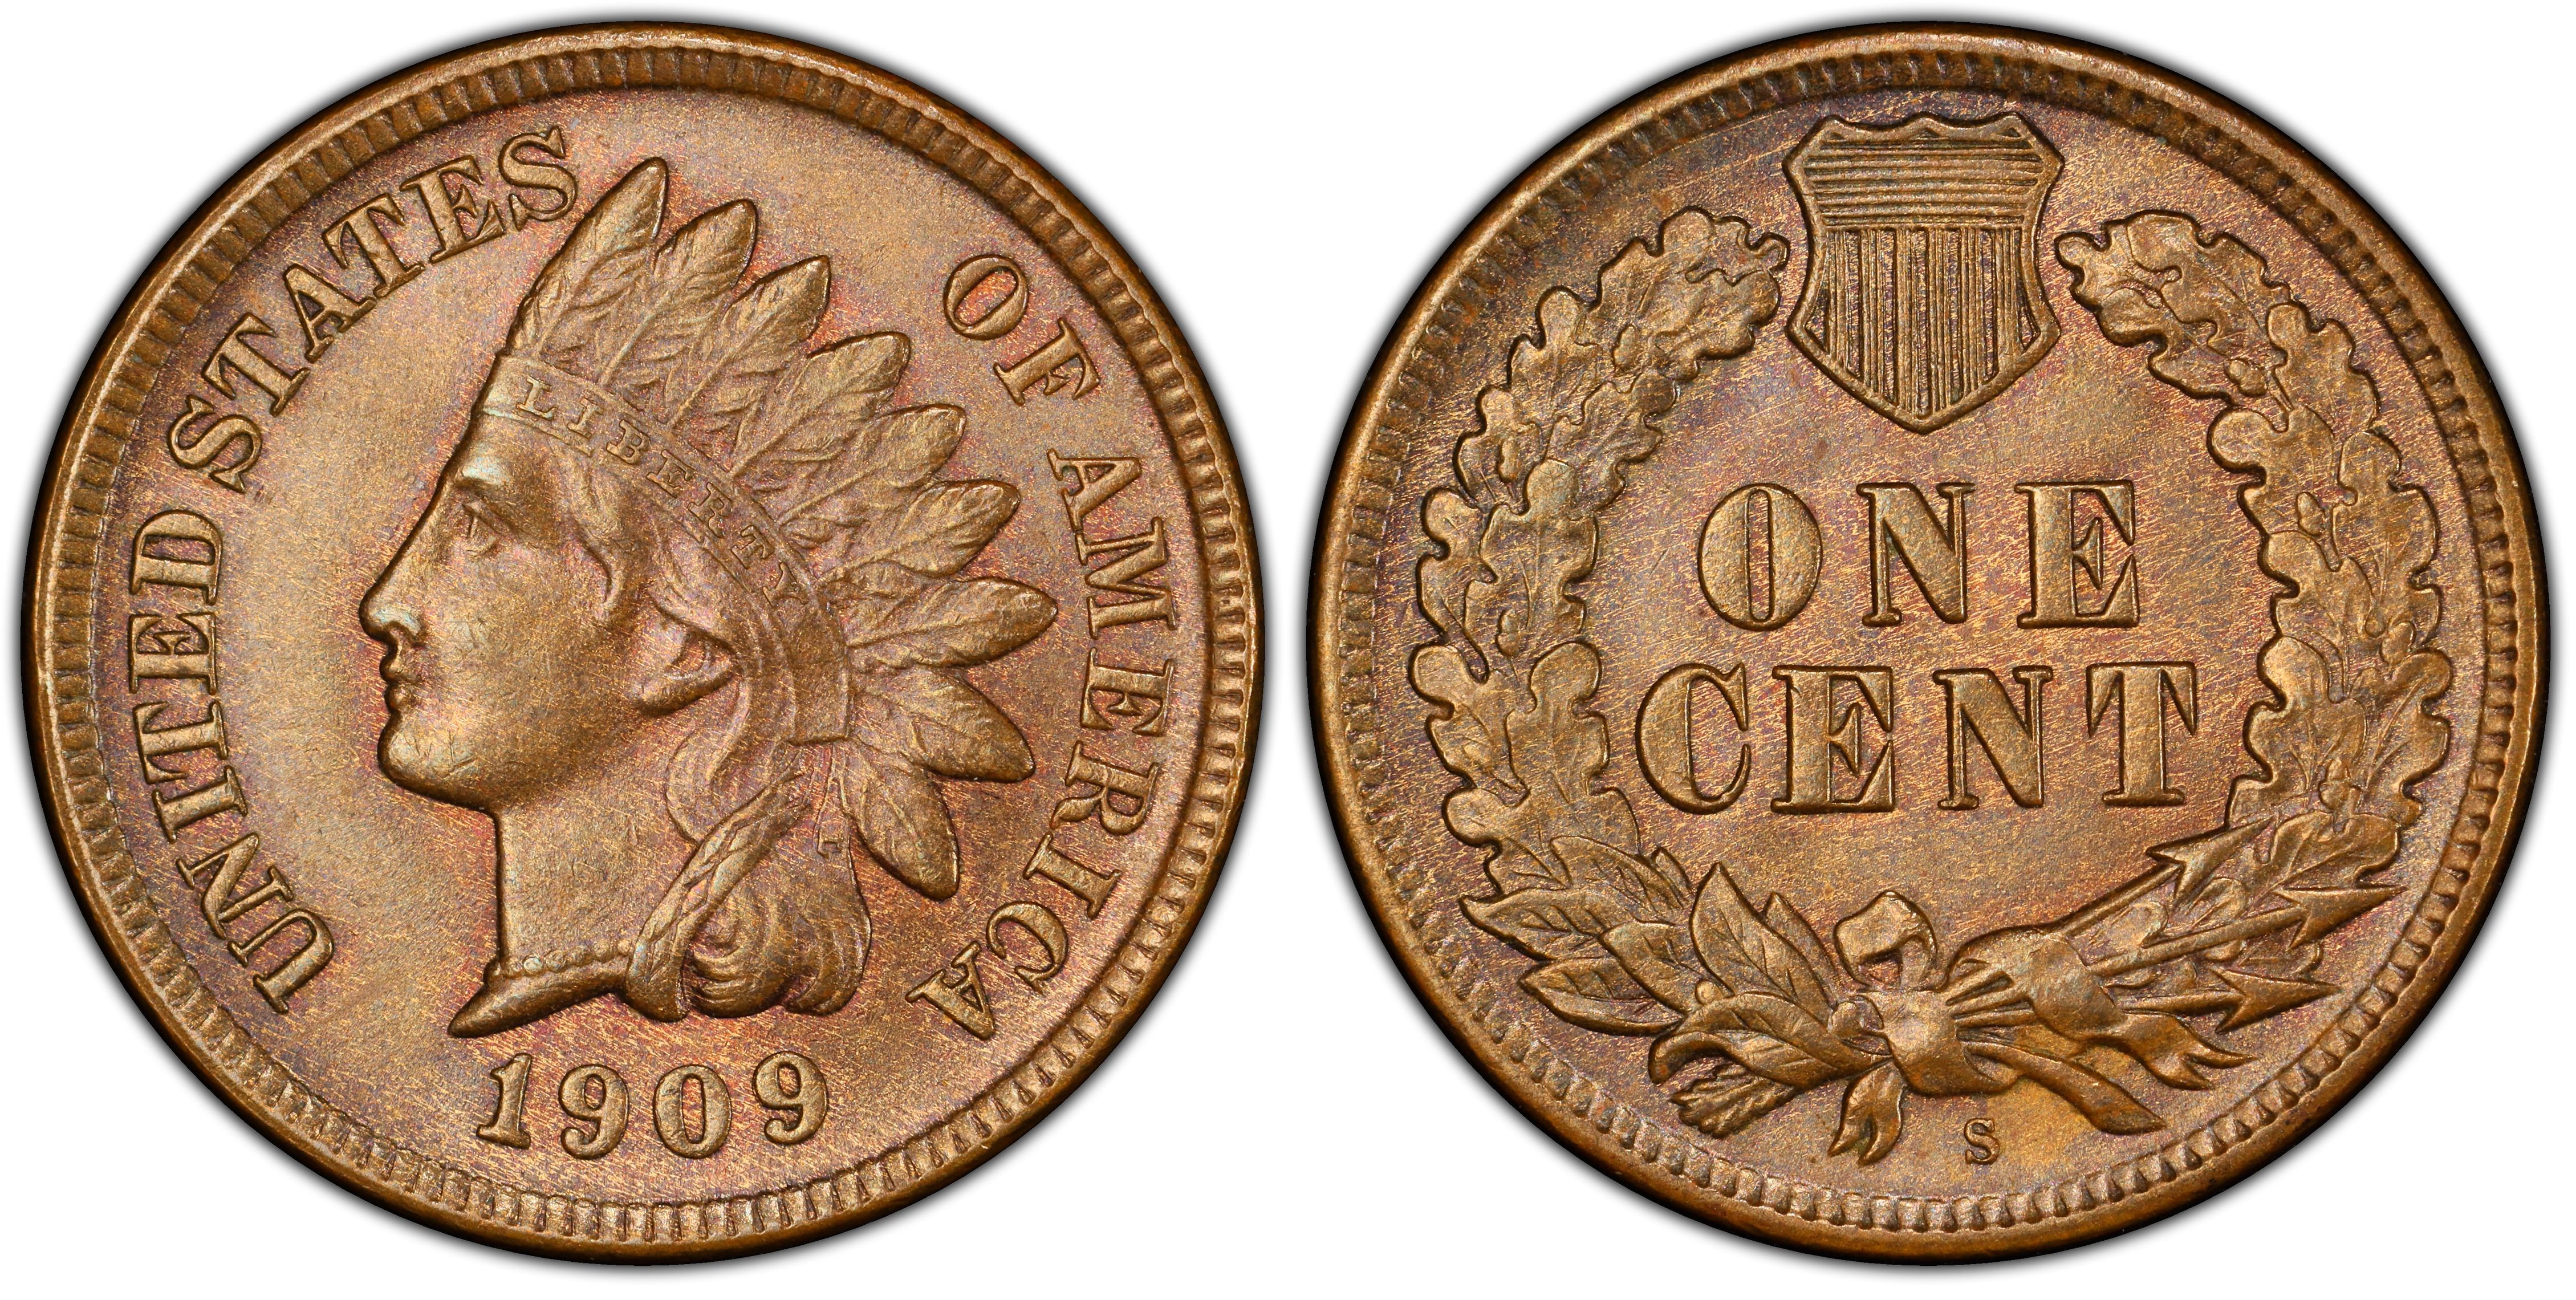 1909-S 1C Indian, BN (Regular Strike) Indian Cent - PCGS CoinFacts